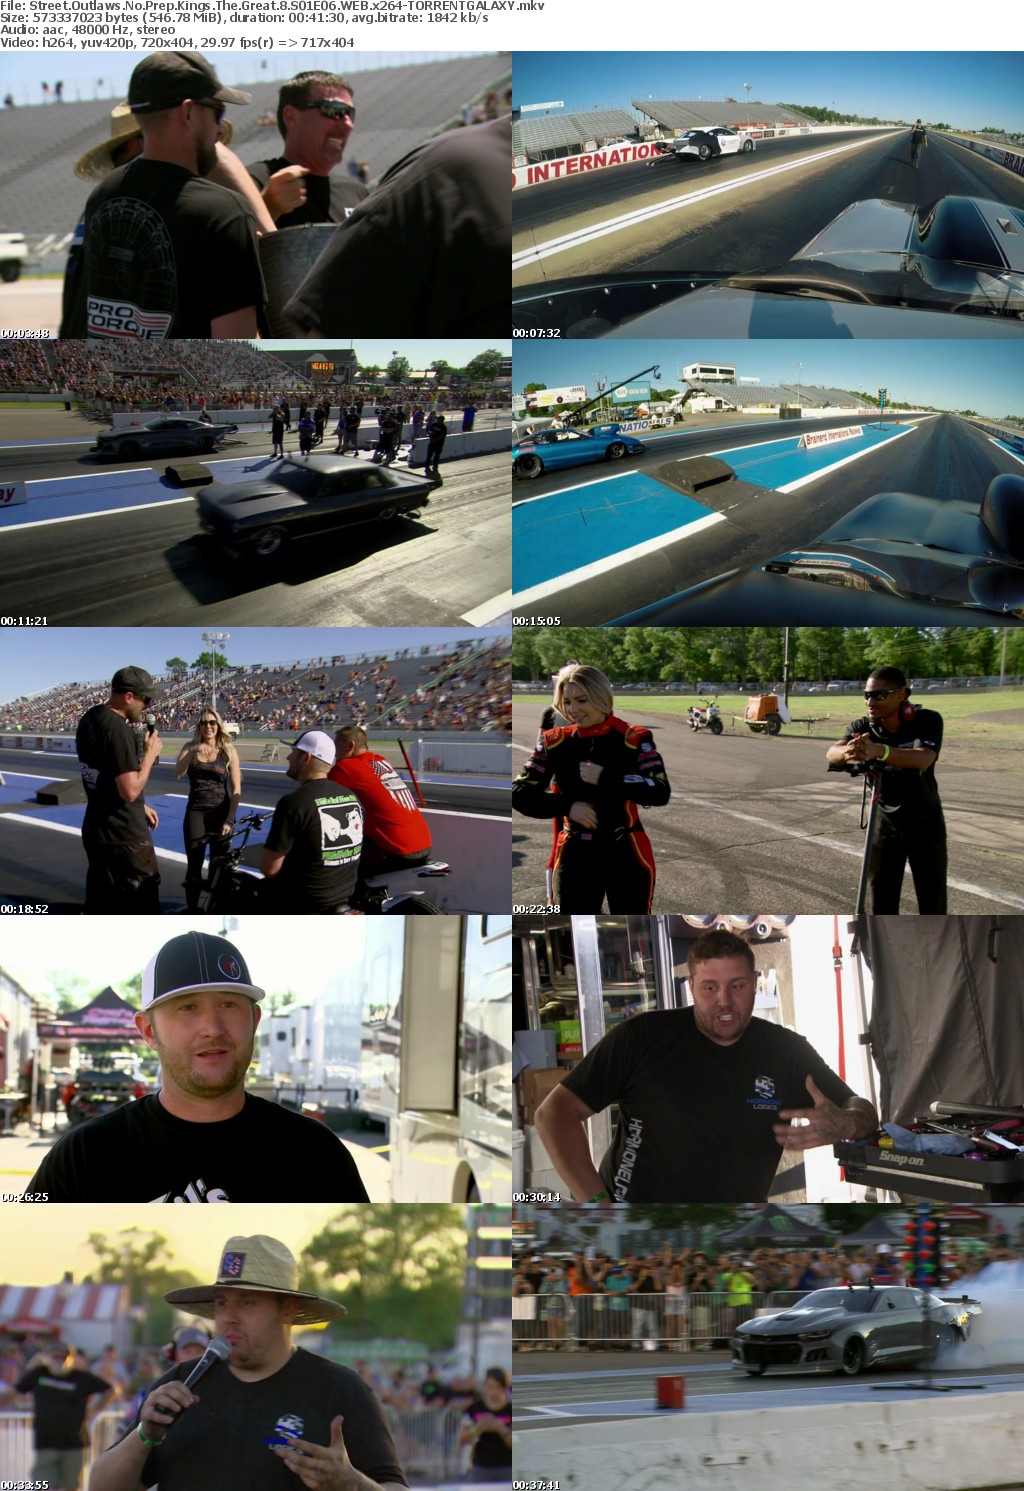 Street Outlaws No Prep Kings The Great 8 S01E06 WEB x264-GALAXY